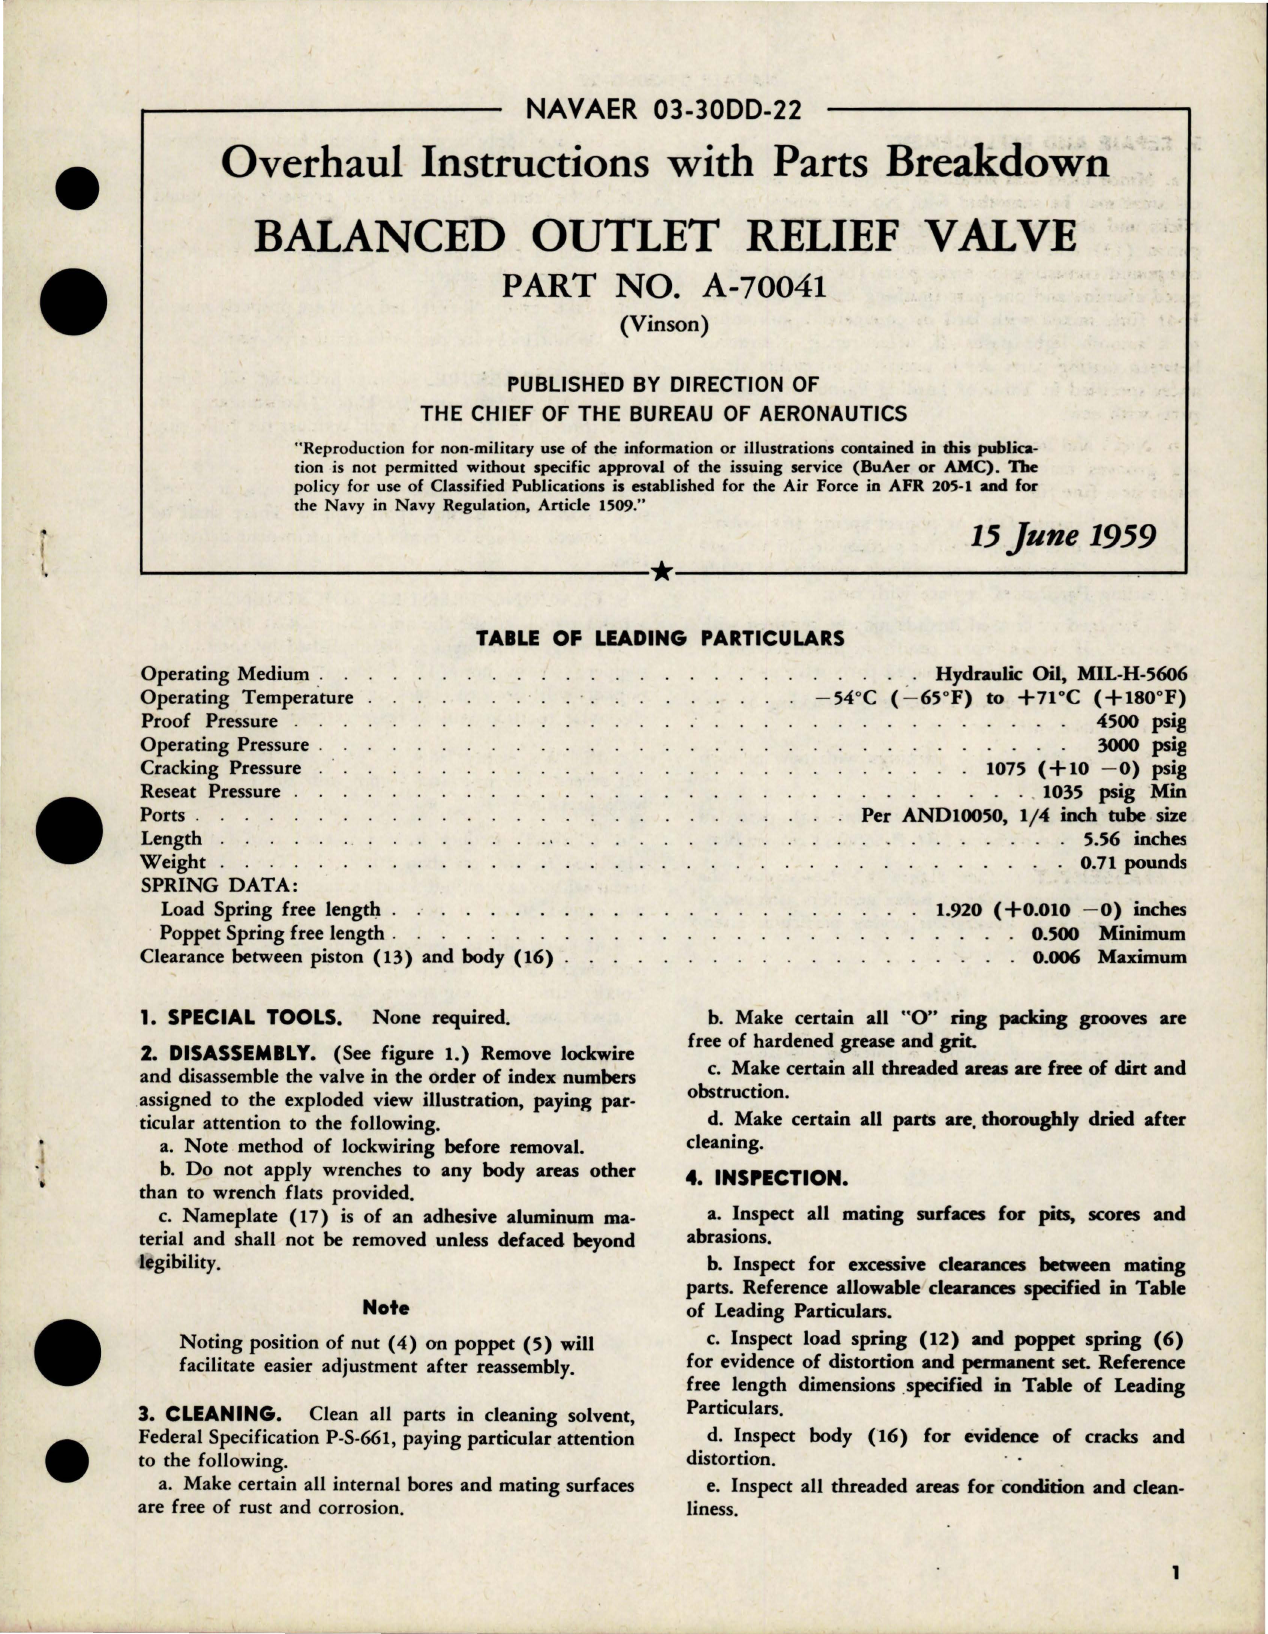 Sample page 1 from AirCorps Library document: Overhaul Instructions with Parts Breakdown for Balanced Outlet Relief Valve - Part A-70041